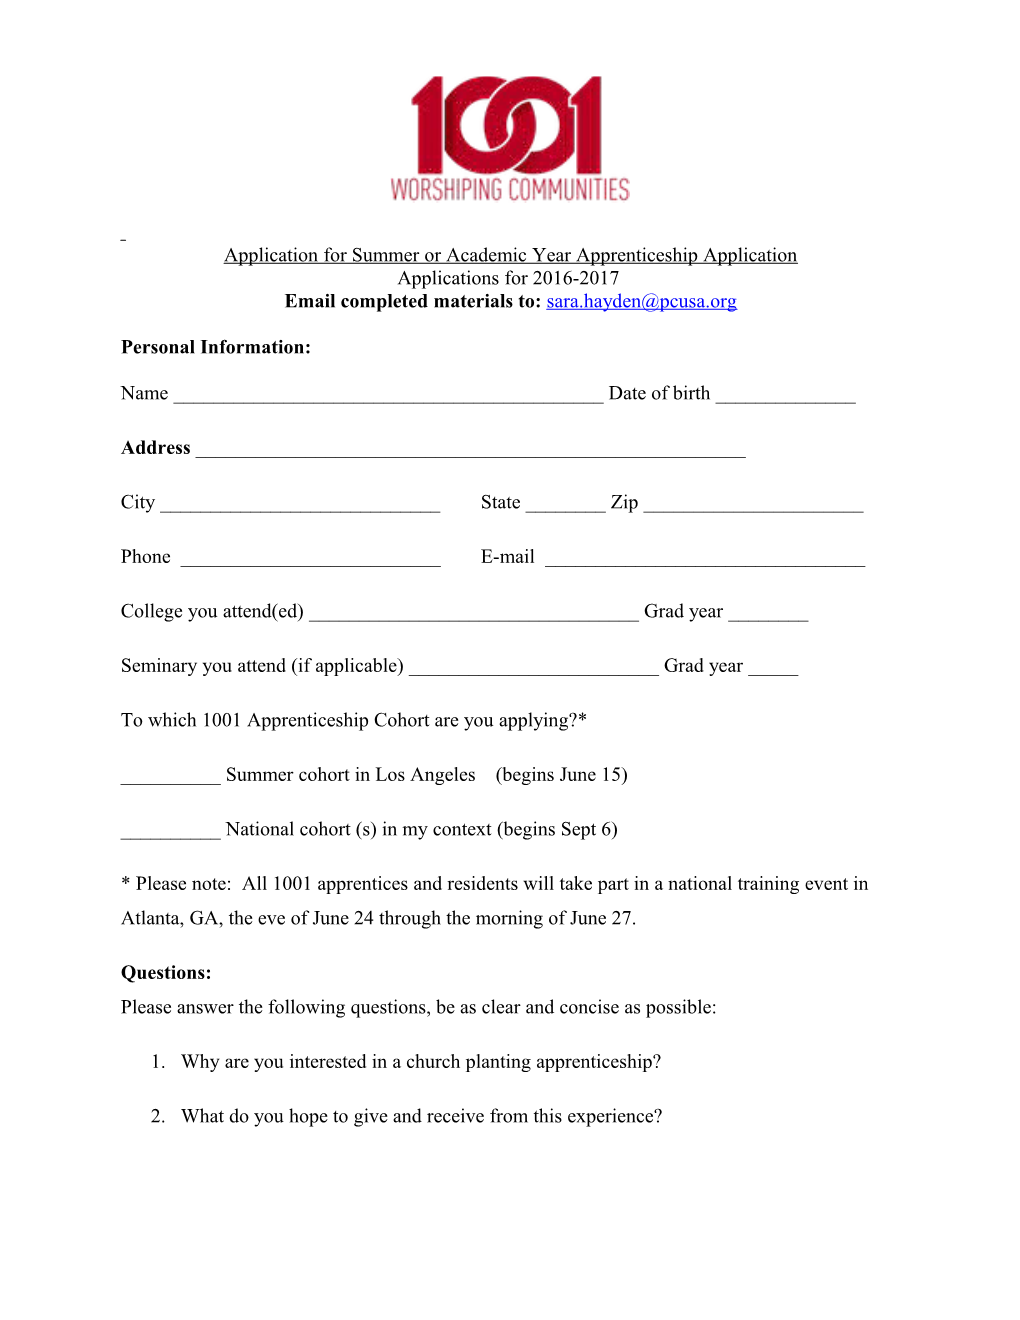 Application for Summer Or Academic Year Apprenticeship Application